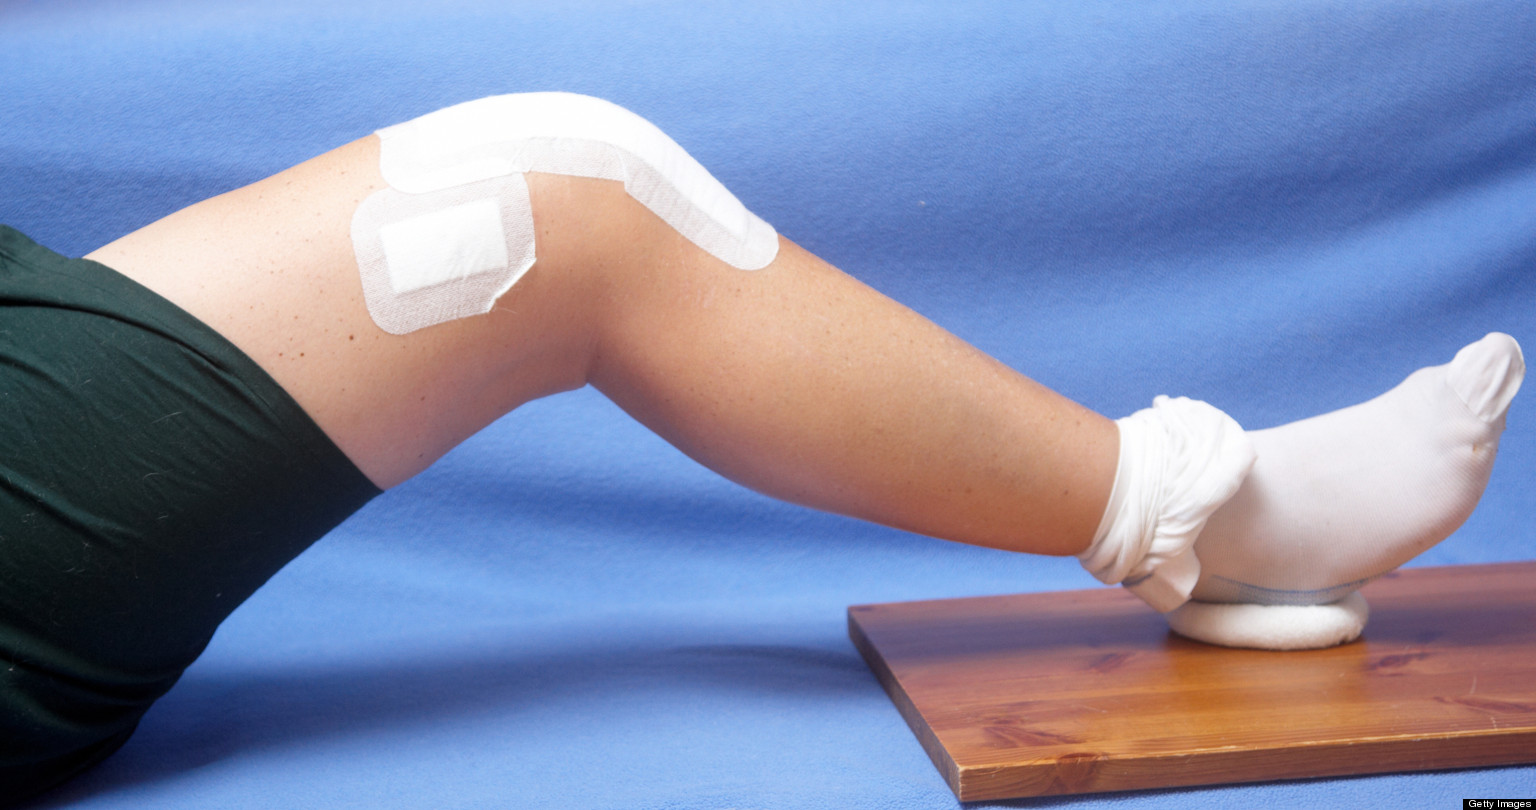 Know The Right Time To Opt For A Knee Replacement Surgery